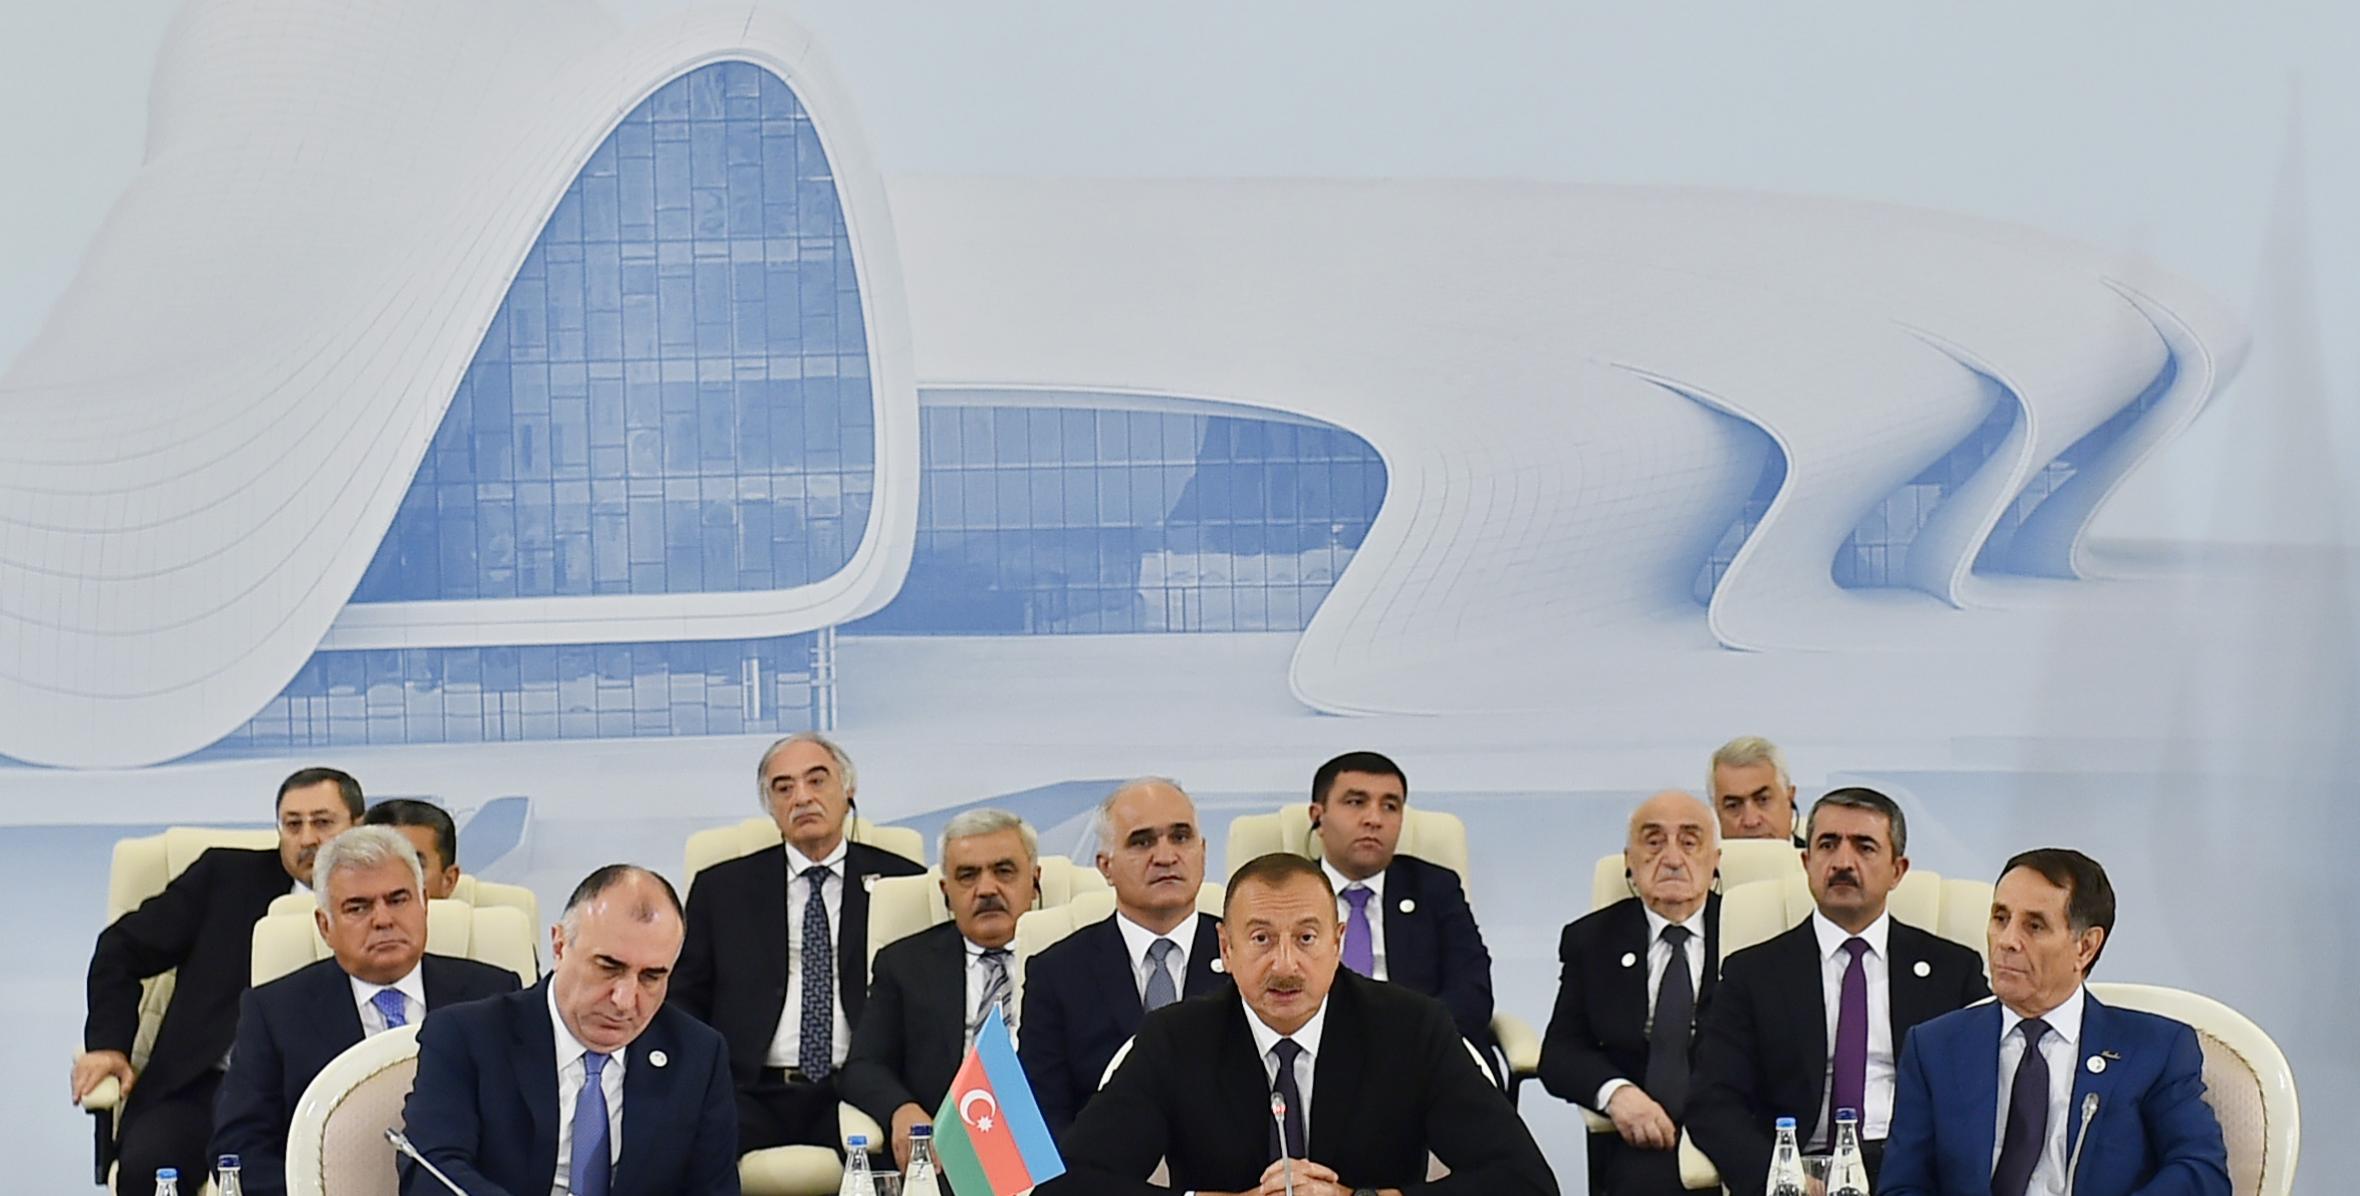 Opening speech by Ilham Aliyev at the trilateral meeting of Azerbaijani, Iranian and Russian presidents